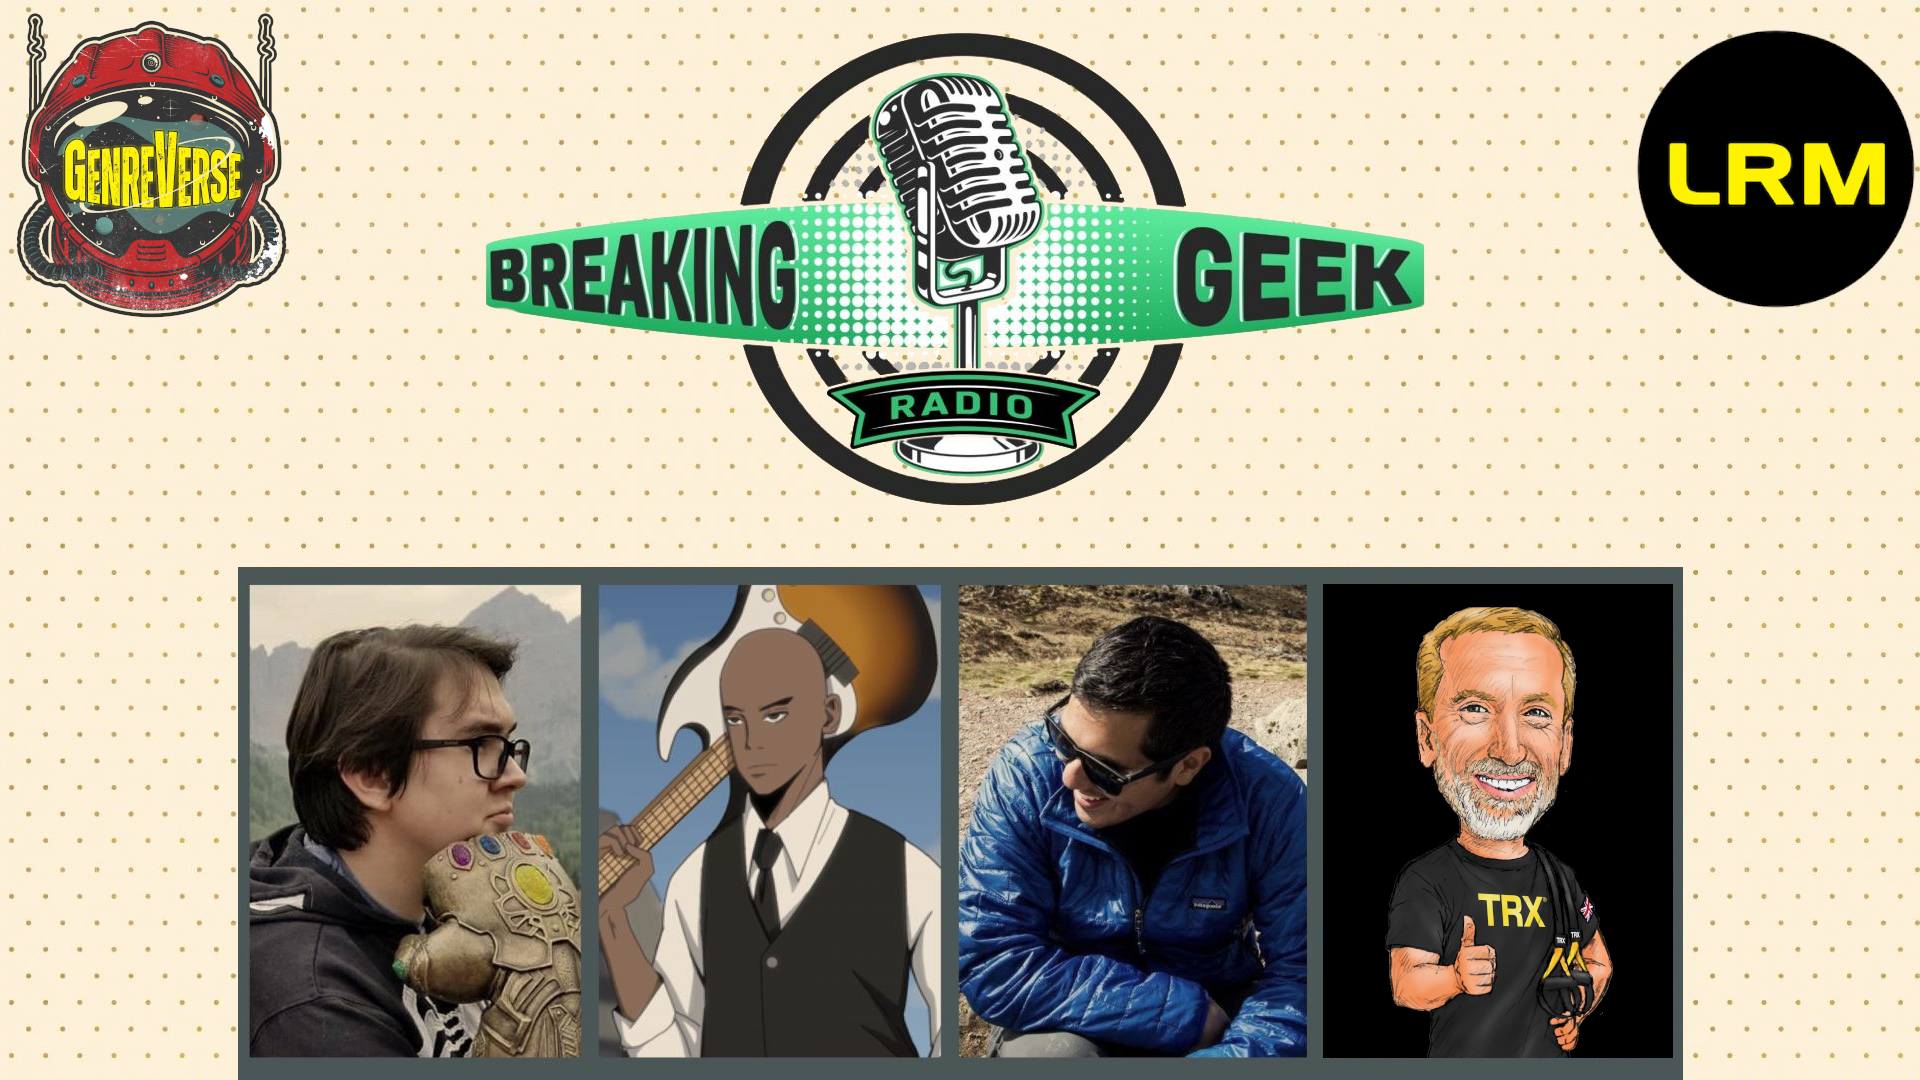 CONTROVERSY! Obi-Wan Kenobi’s Moses Ingram Racism Attacks And The Results Of The Heard/Depp Trial | Breaking Geek Radio: The Podcast